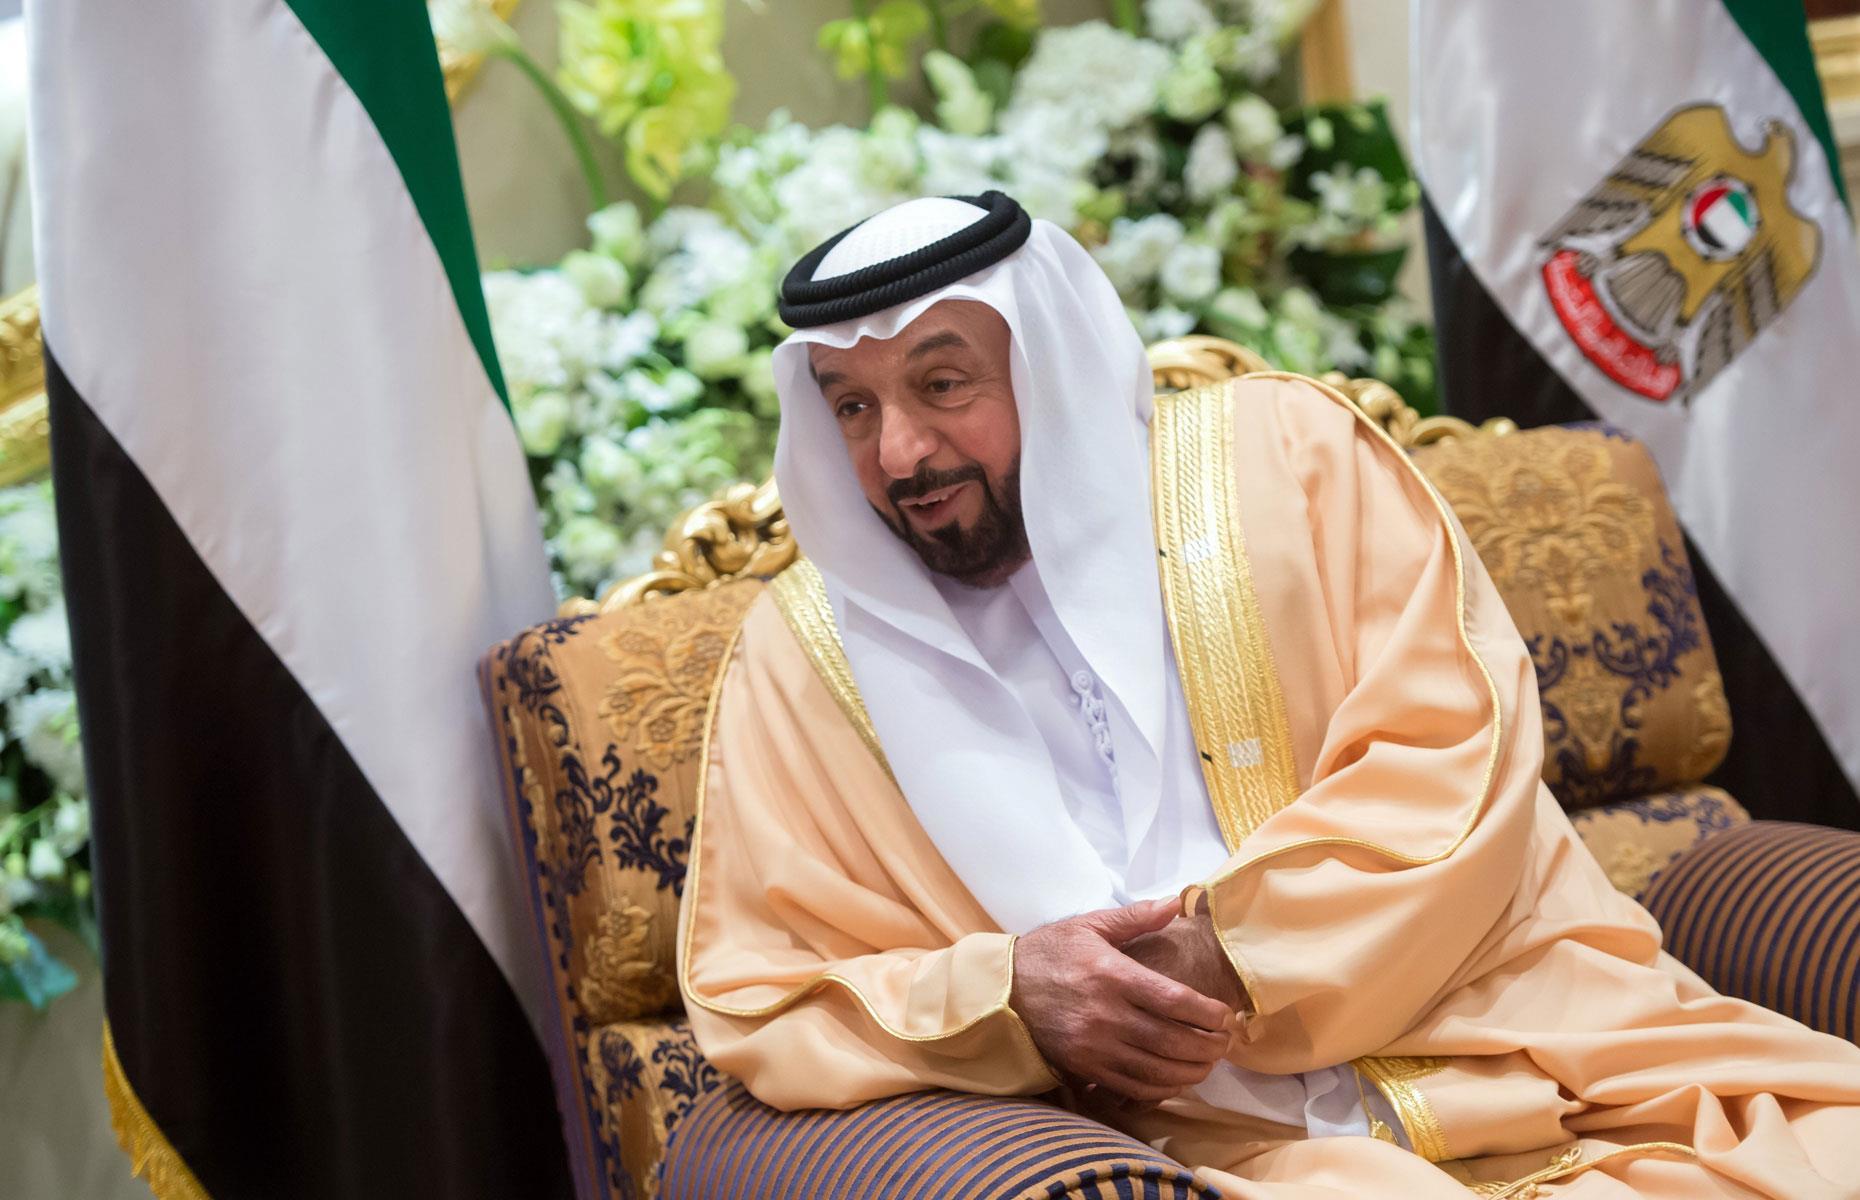 <p>Deriving the bulk of its estimated $150 billion fortune from oil, the House of Nahyan has been the reigning royal family of Abu Dhabi since 1793.</p>  <p>The clan counts 200 male members – the number of females is unknown.</p>  <p>The head of the family, Sheikh Khalifa bin Zayed Al Nahyan (pictured), is also the leader of the UAE and chairs the Abu Dhabi Investment Authority, which manages $875 billion in assets, including Dubai's Burj Khalifa skyscraper, the world's tallest building. </p>